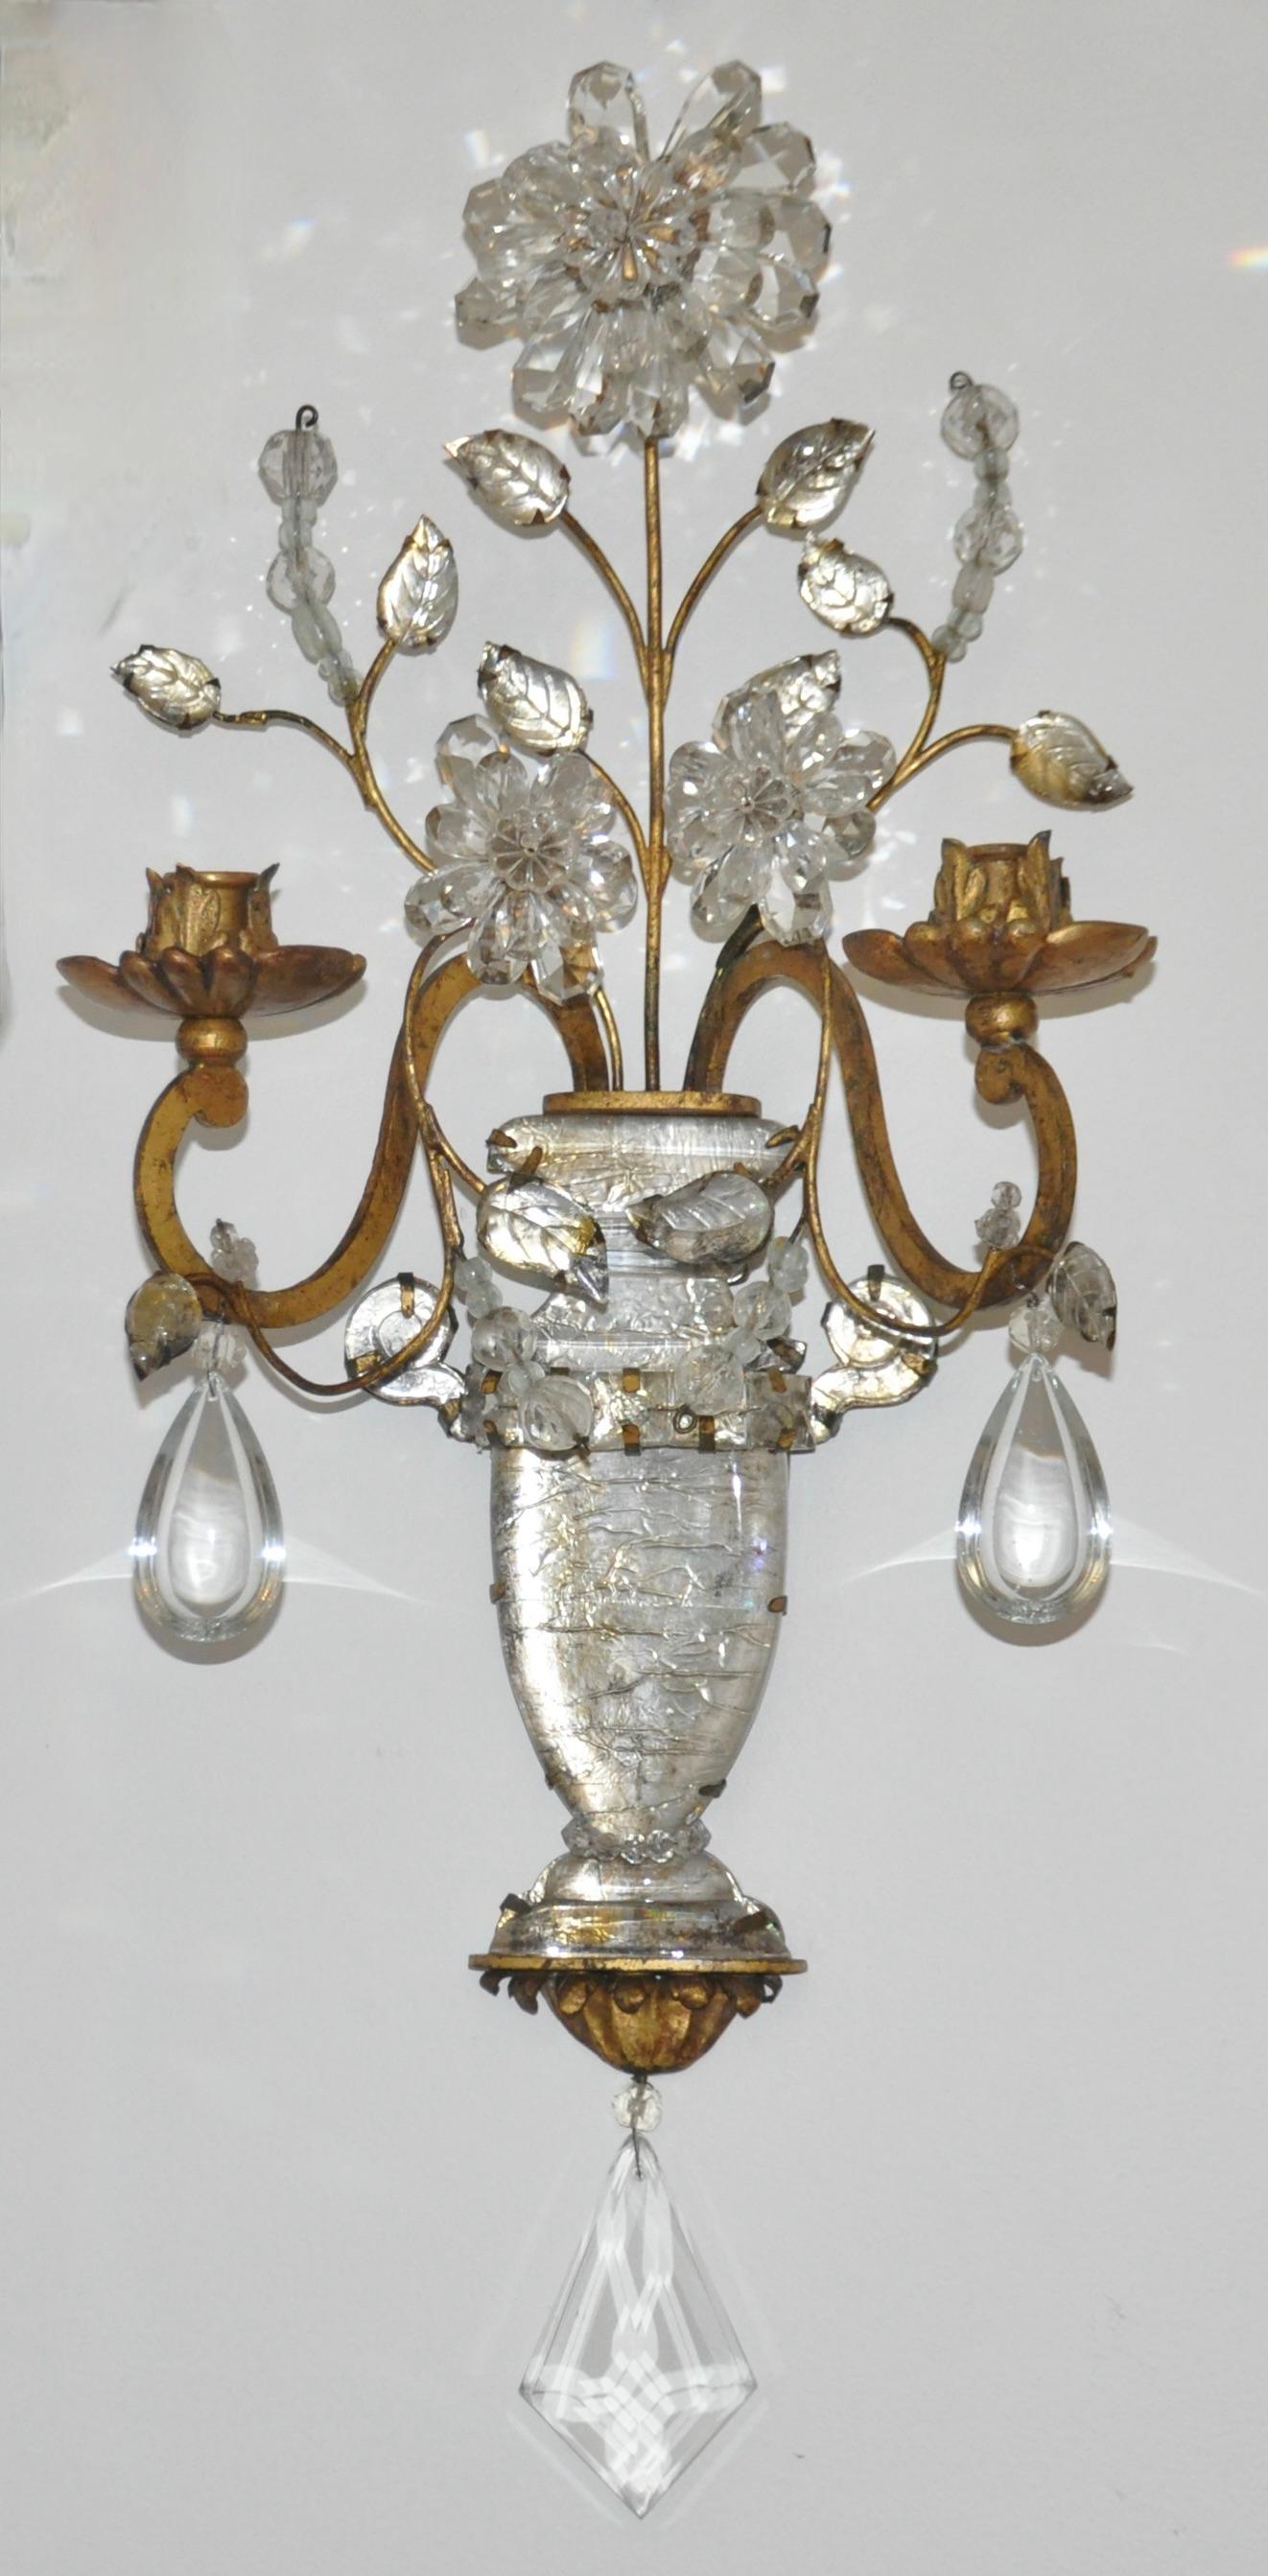 Second pair of early 20th century Bagues sconces in Regence 